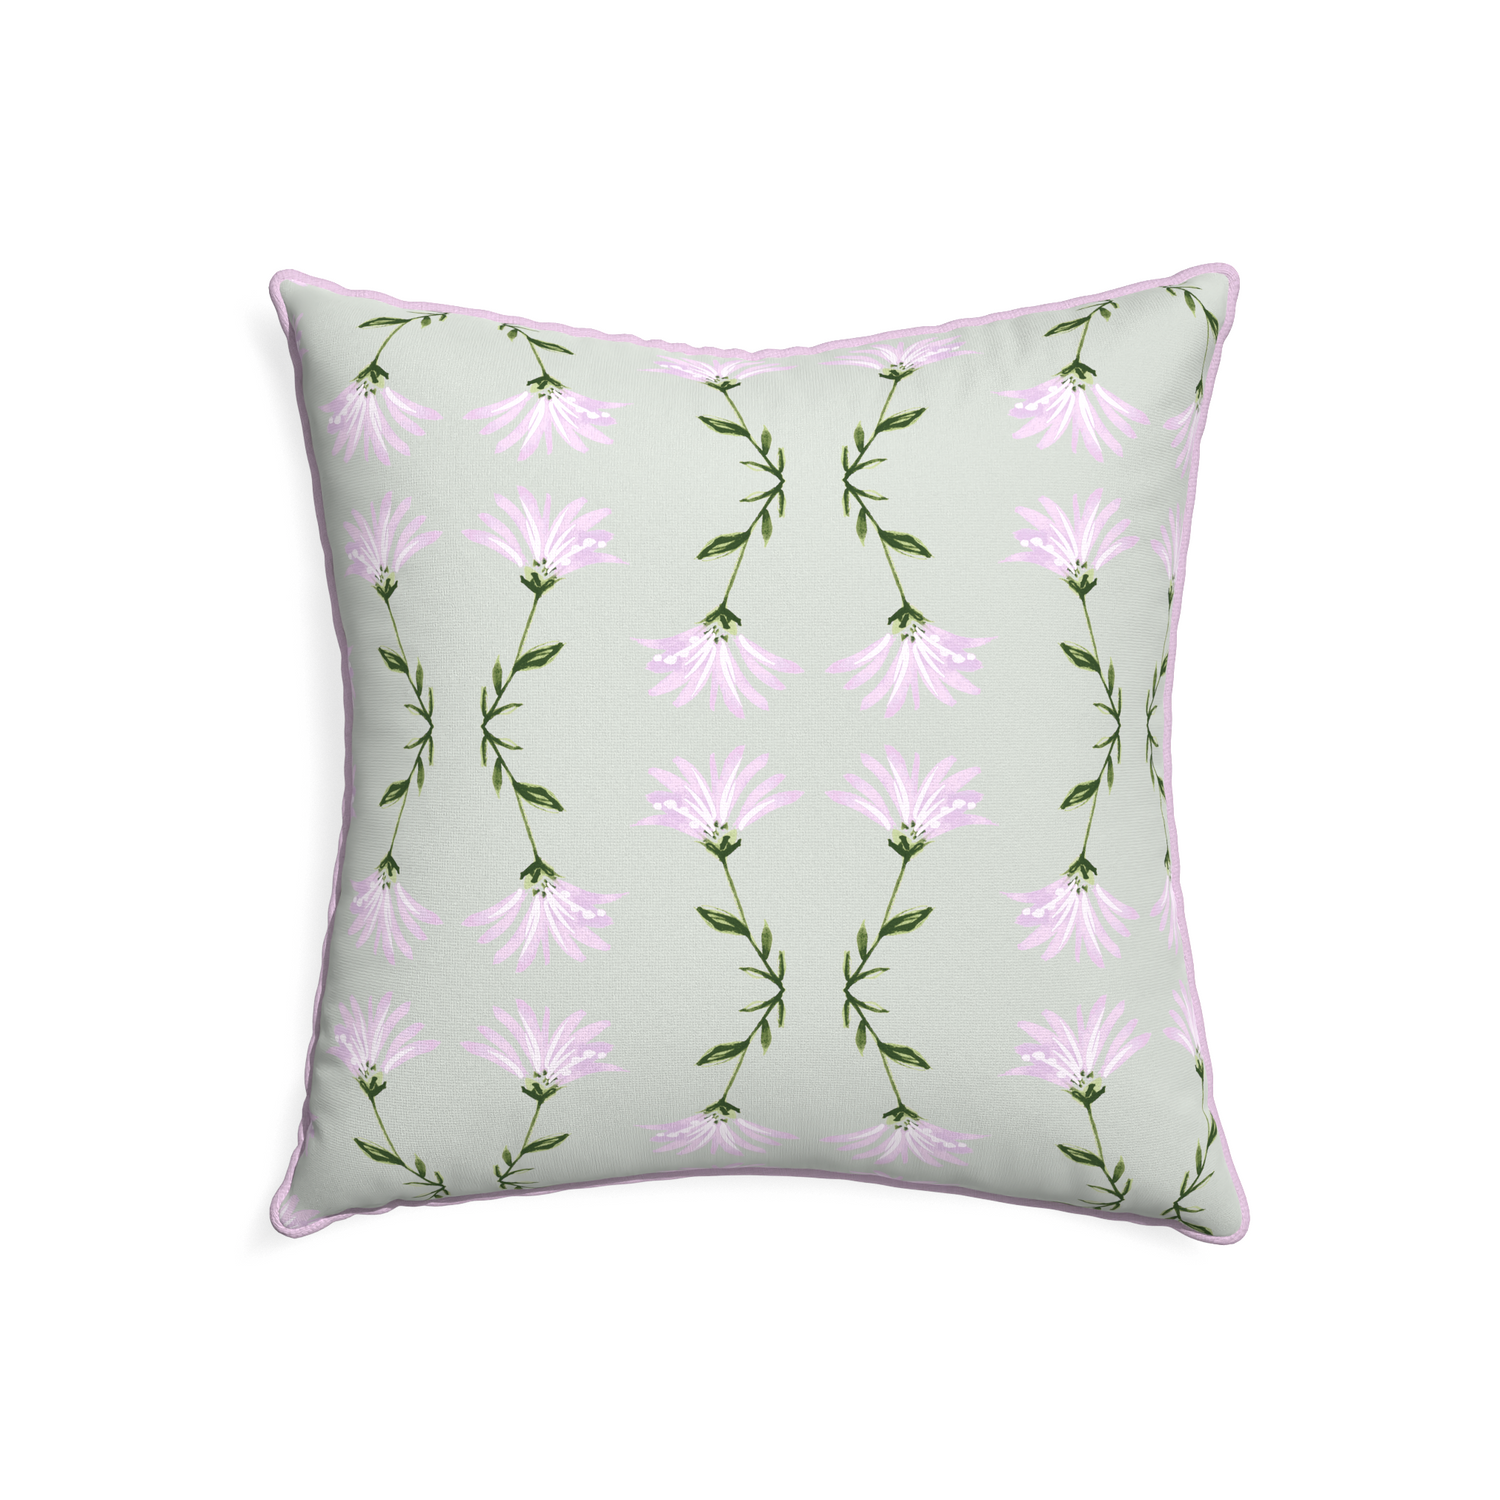 22-square marina sage custom pillow with l piping on white background